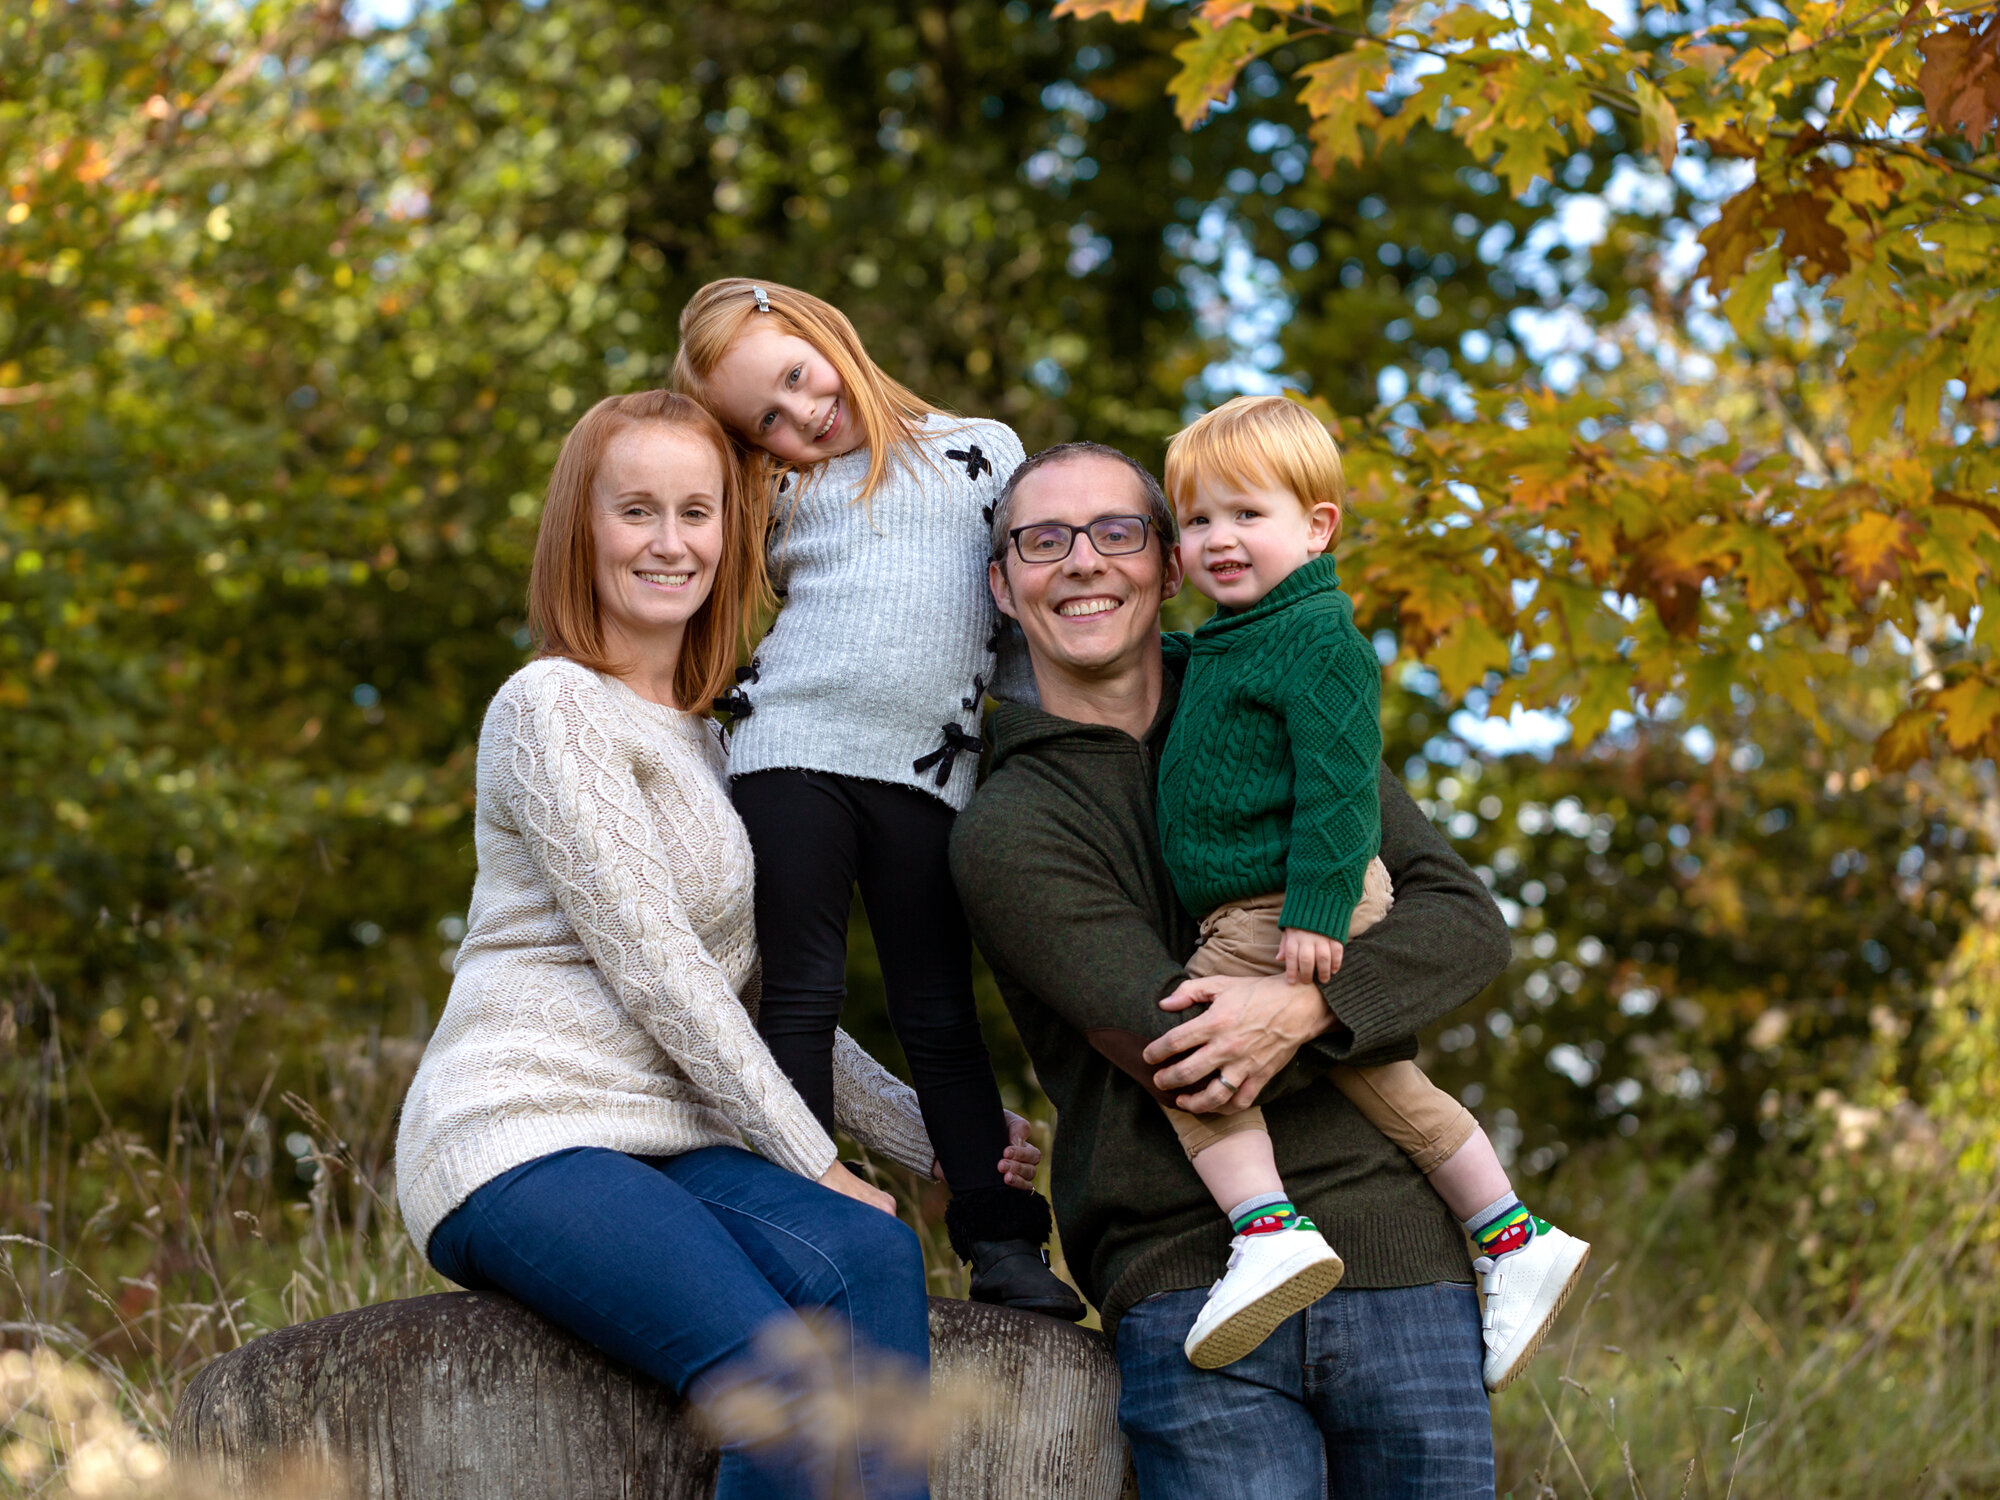 family photographer in caerphilly, near cardiff, south wales